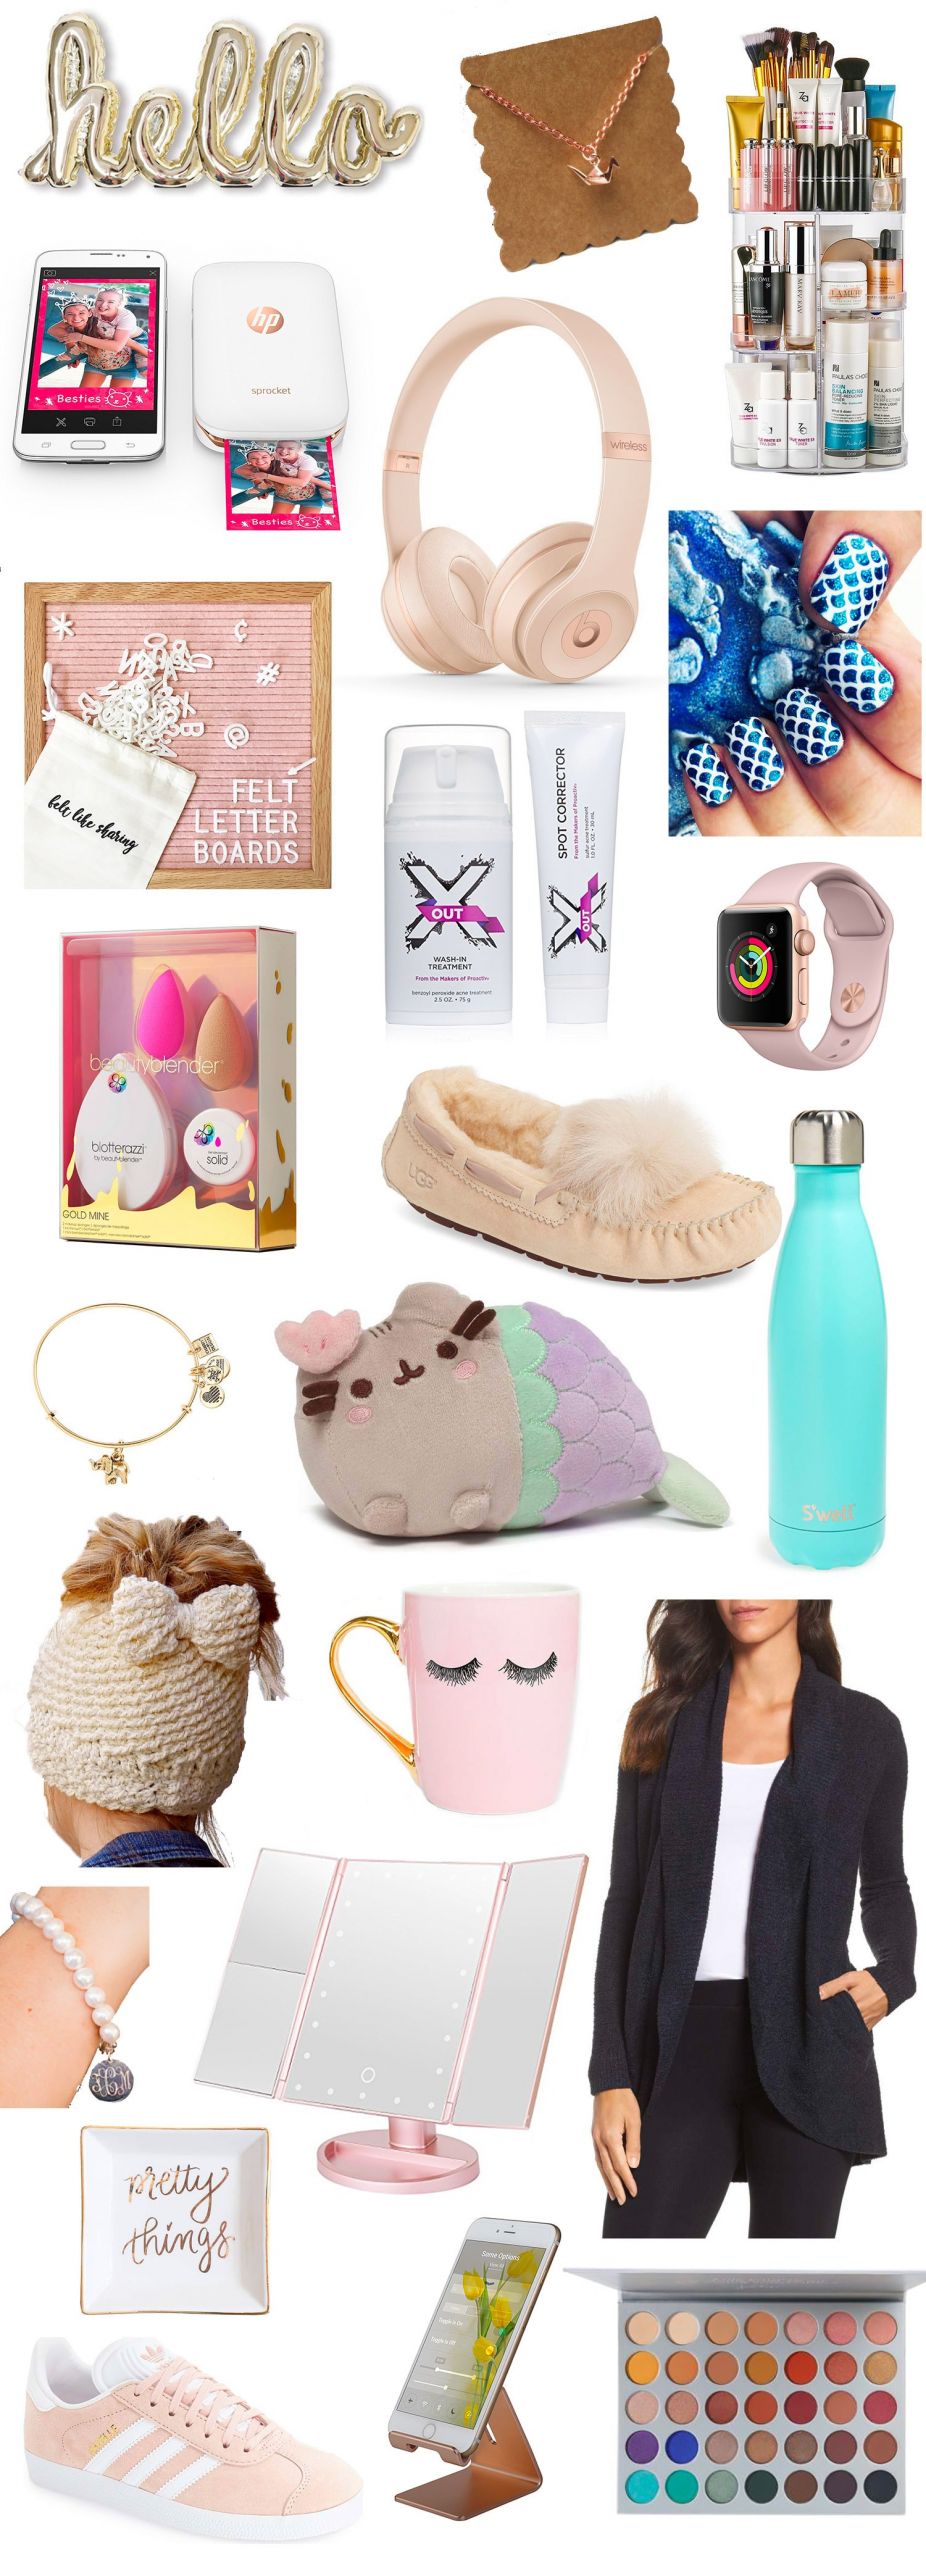 Gift Ideas For Tween Girls
 Top Gifts for Teens This Christmas